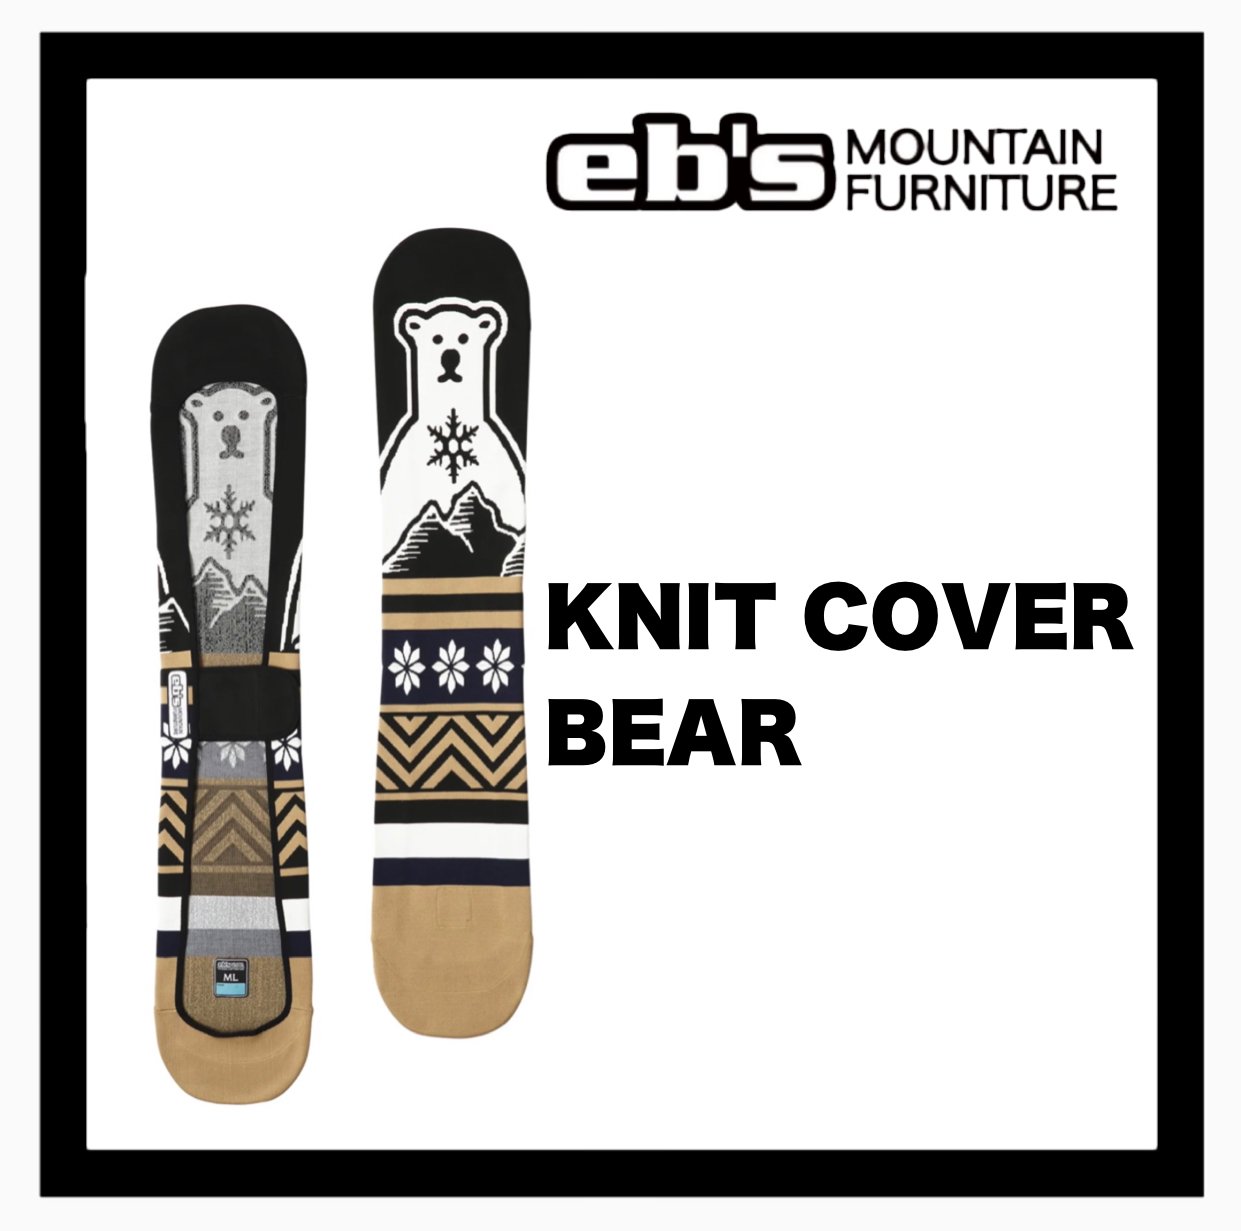 <img class='new_mark_img1' src='https://img.shop-pro.jp/img/new/icons14.gif' style='border:none;display:inline;margin:0px;padding:0px;width:auto;' />eb'sKNIT COVER : BEAR